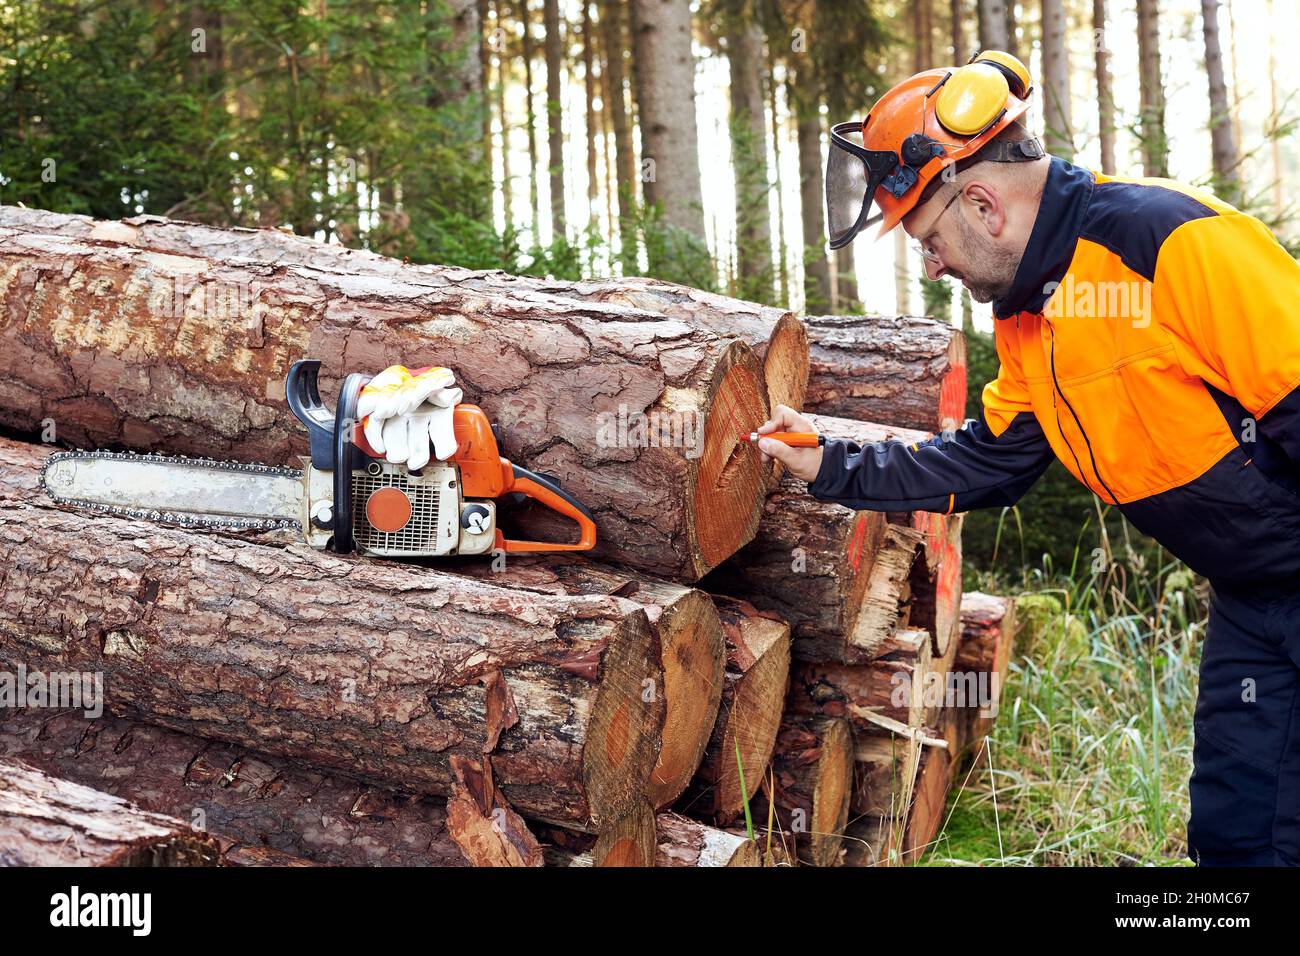 Professional lumberjack with protective workwear and chainsaw working in a forest Stock Photo